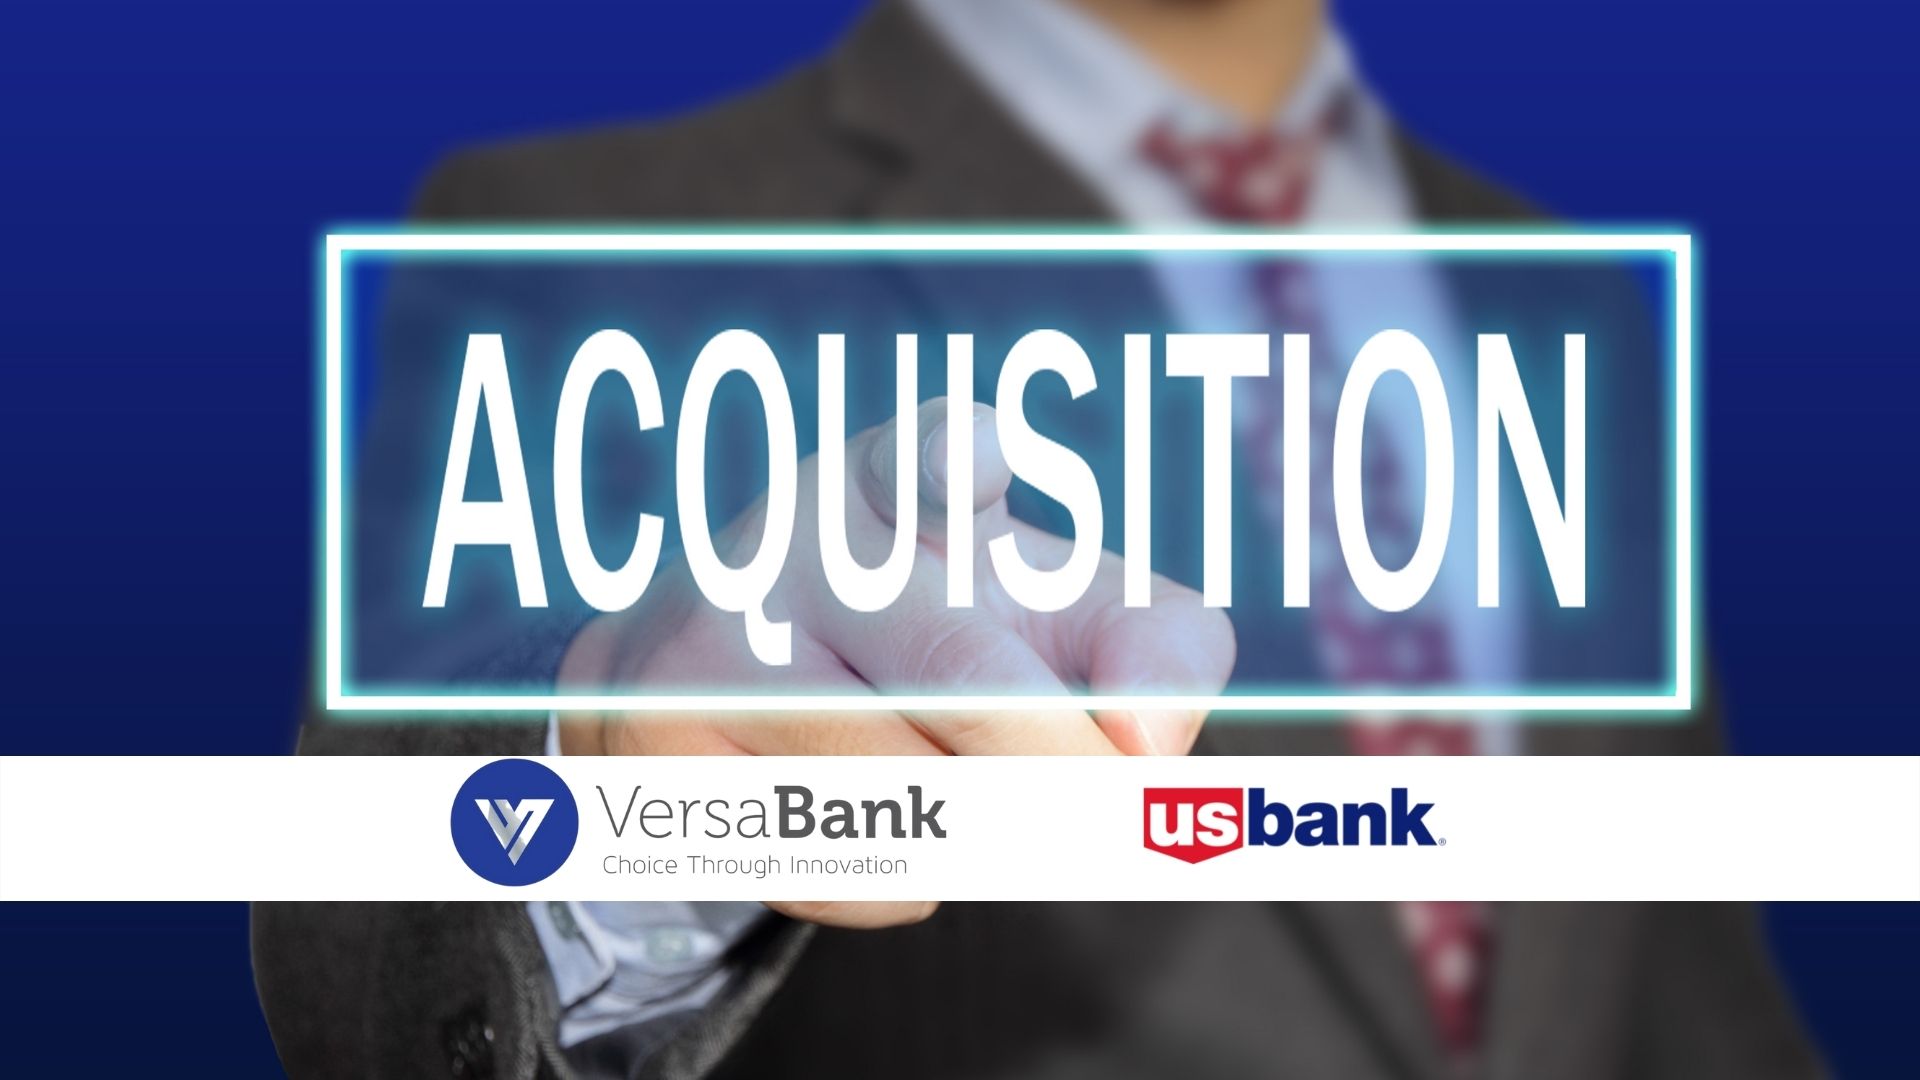 Canada’s VersaBank Makes Bid to Acquire U.S. Bank Charter with Purchase of MN Bank Branch